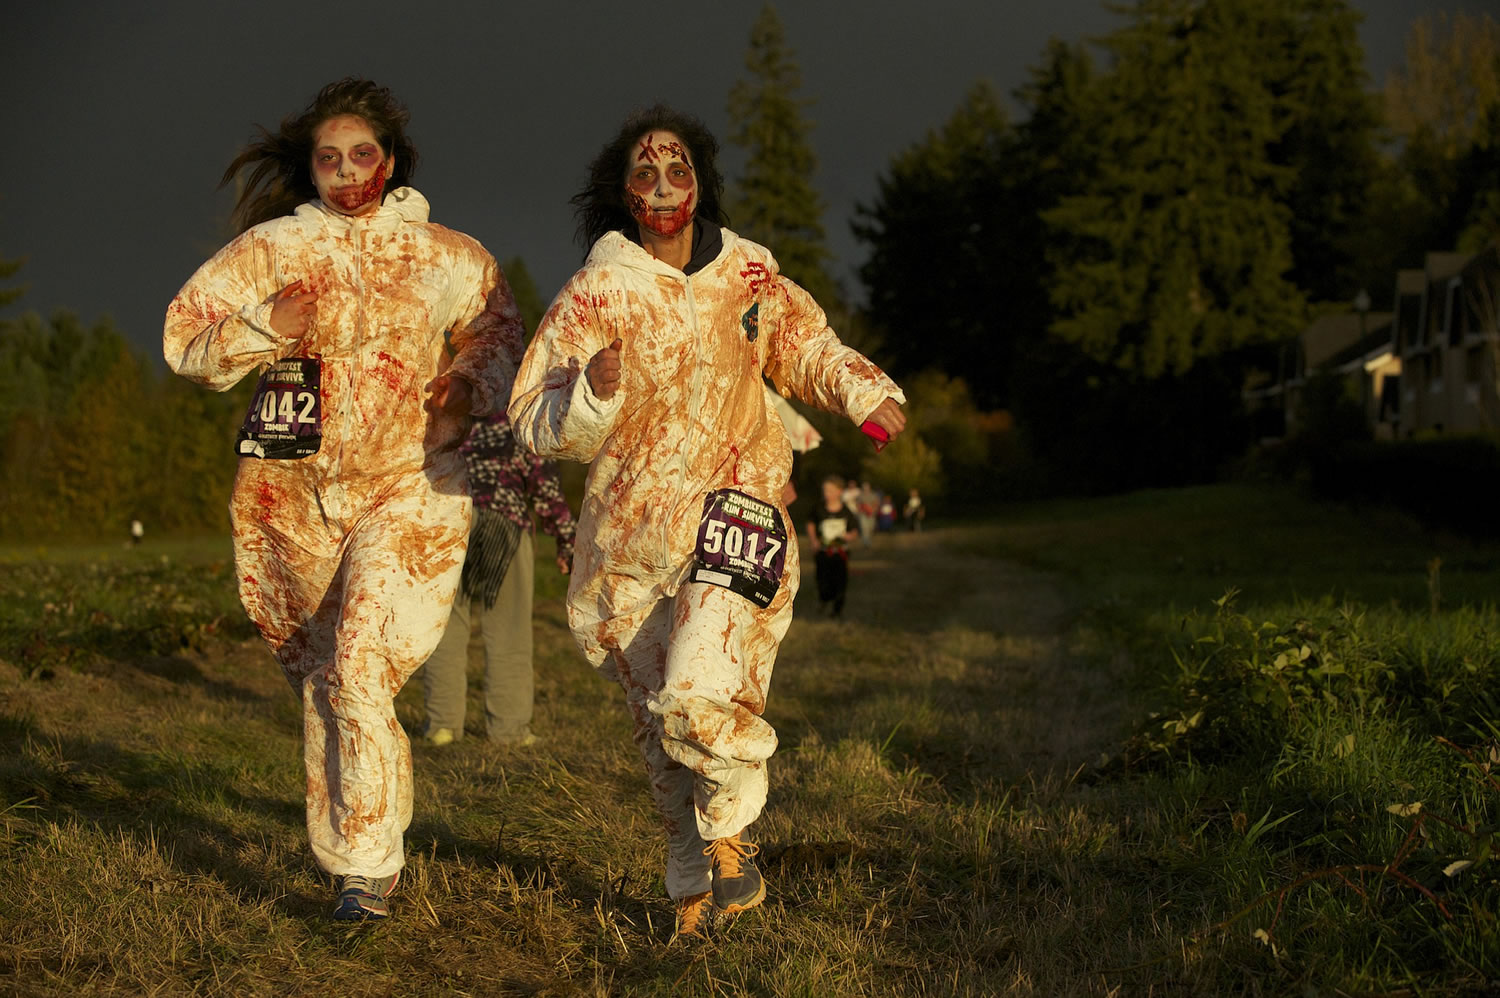 Racine Robson, 14, left, and her mom Kristina Forsberg, both from Vancouver, run in the Run2Survive fun run in 2013.